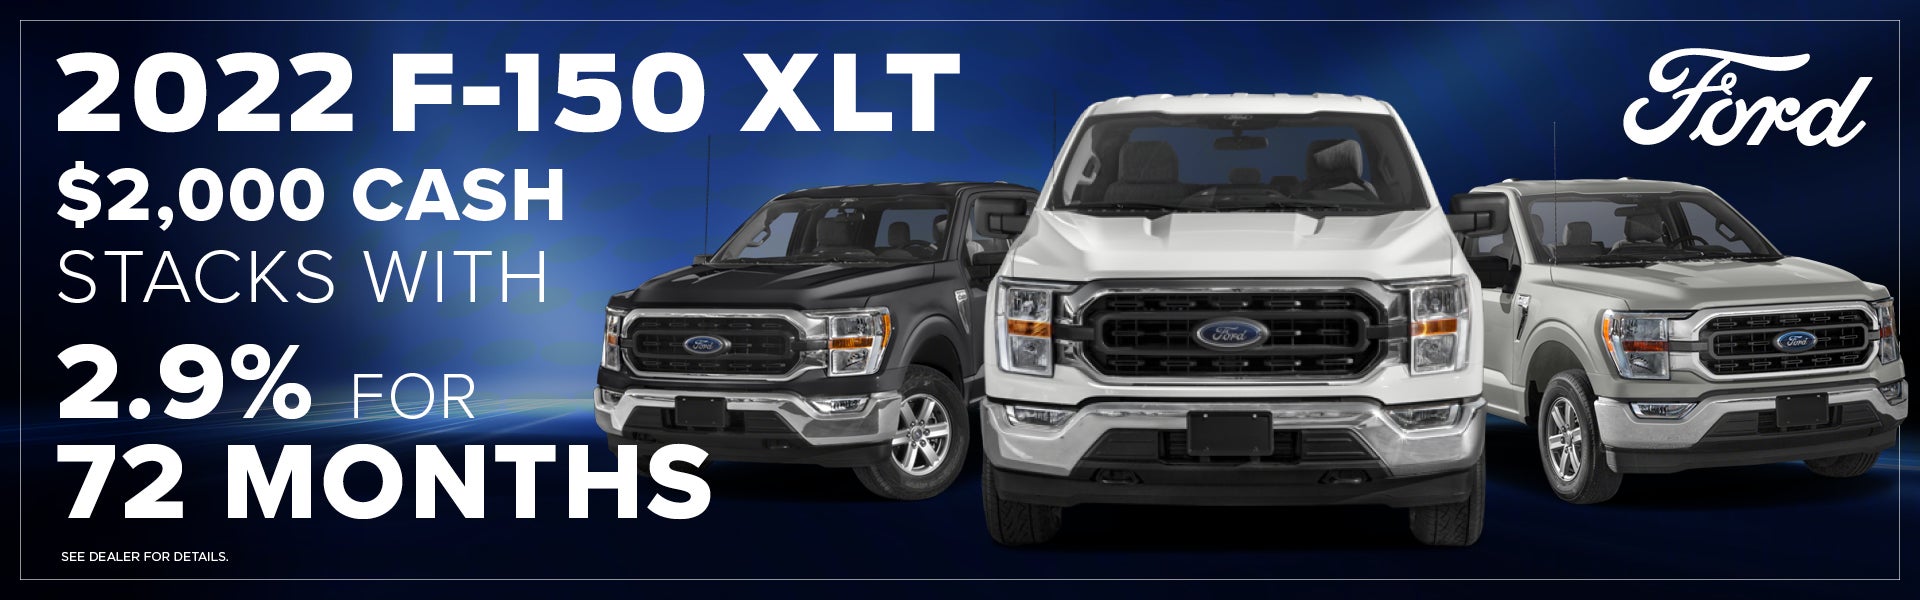 Check Out Friendship Ford's F-150 Inventory!